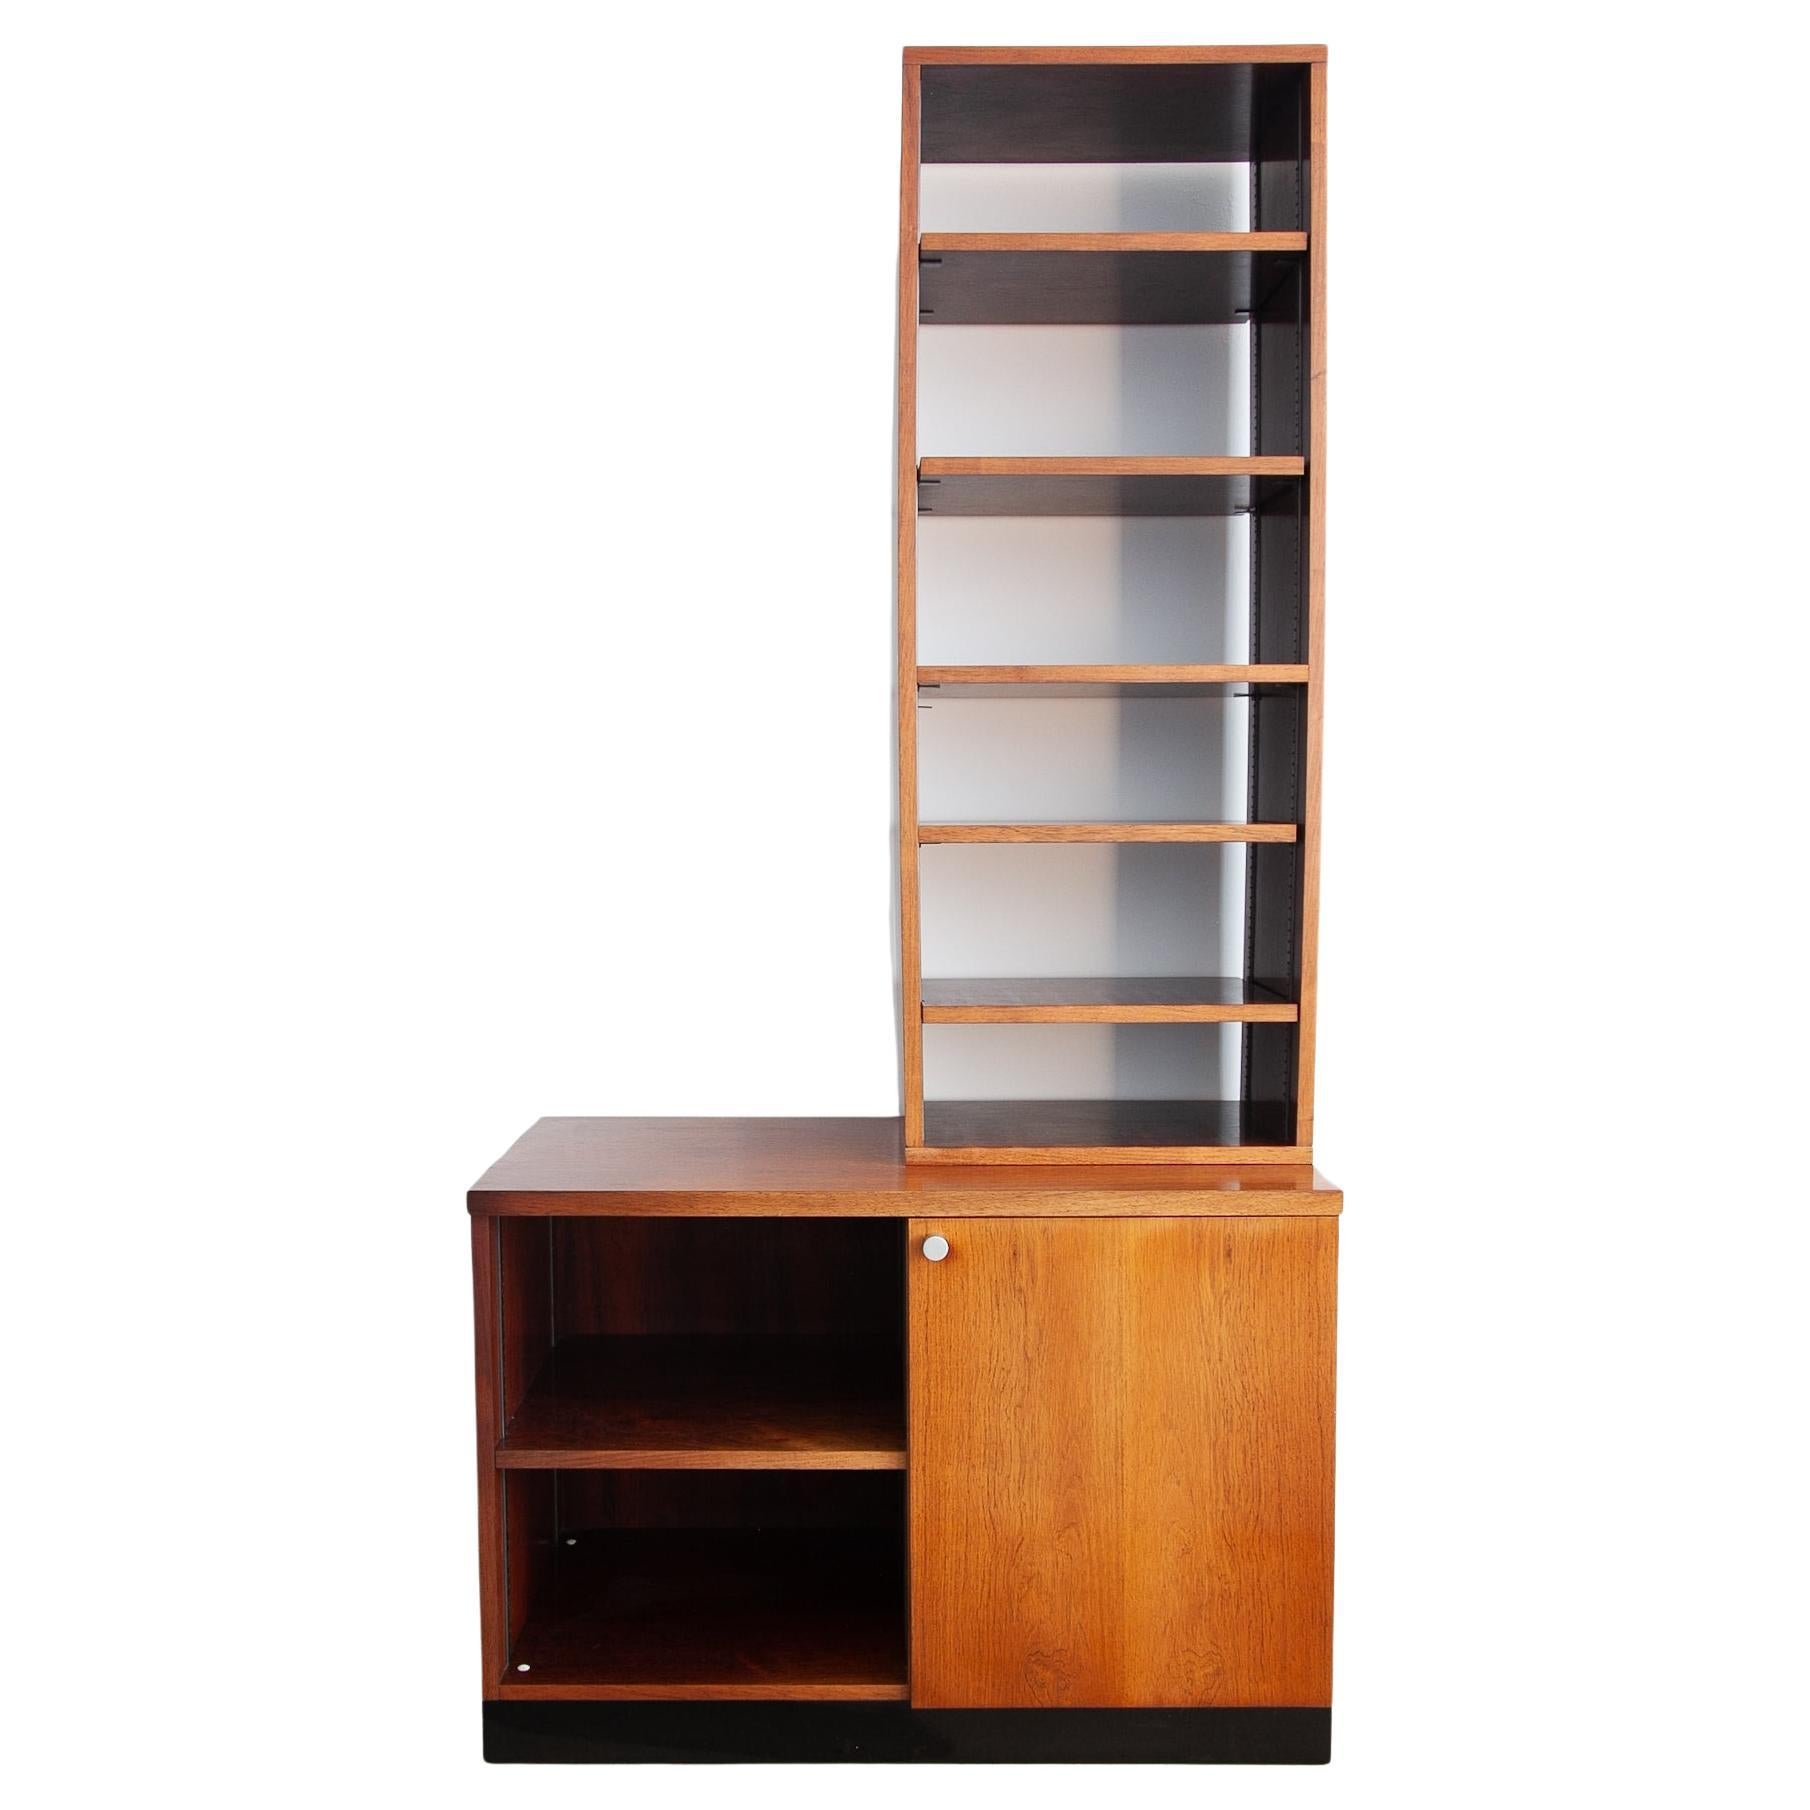 Original cabinet, bookcase designed by Alfred Hendrickx and manufactured by Belform (Malines, Belgium) in the mid 1950s. Above: 5 display shelves (D 25, W 50 cm). At the bottom a cabinet (H 54, D 50, W 105 cm) with 1 right side door with silver